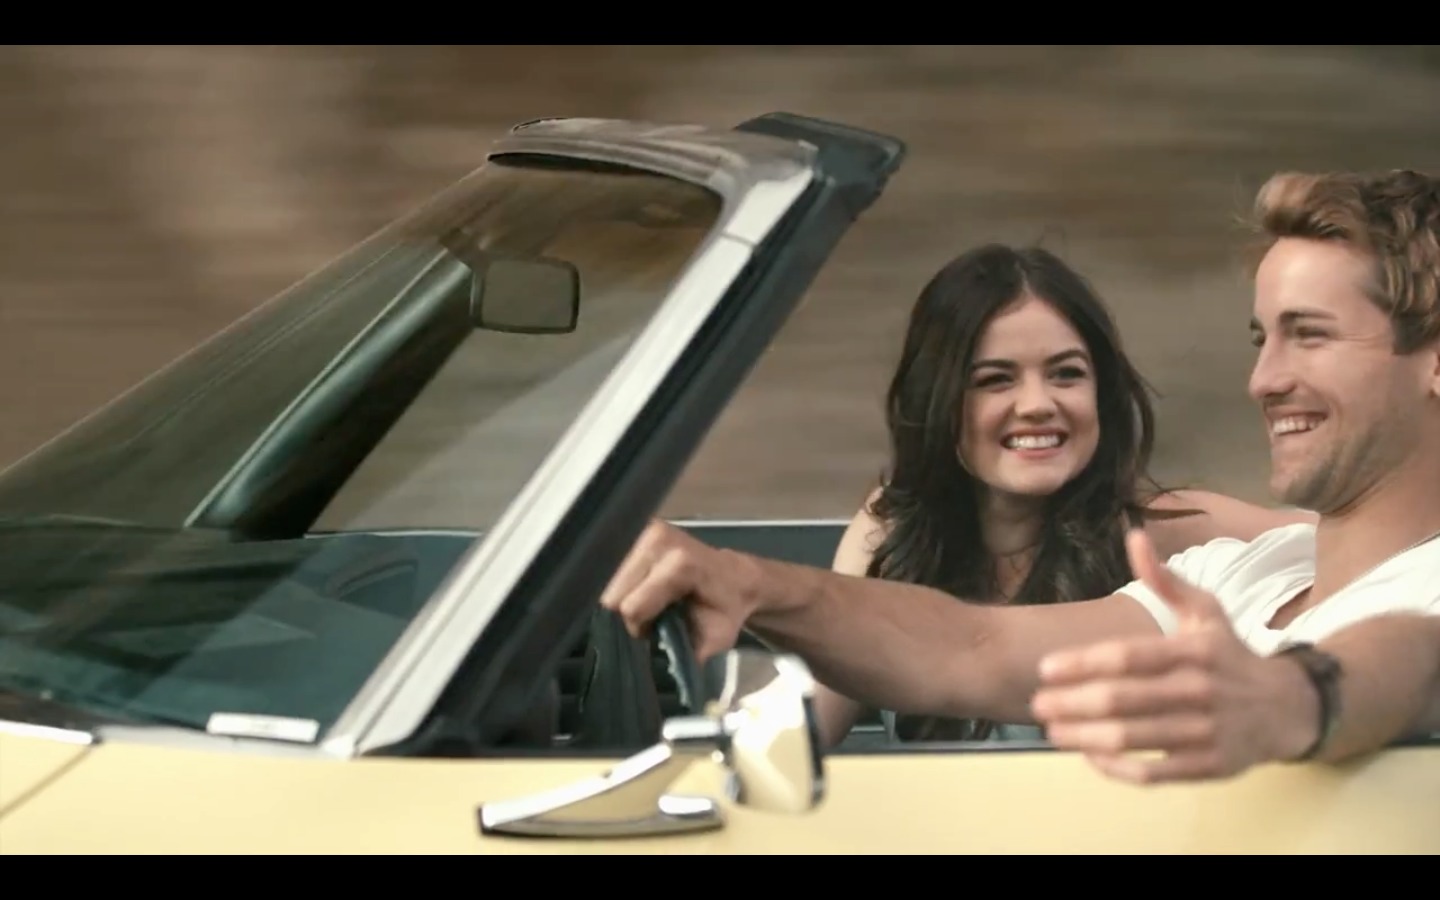 Skyler Hart and Lucy Hale